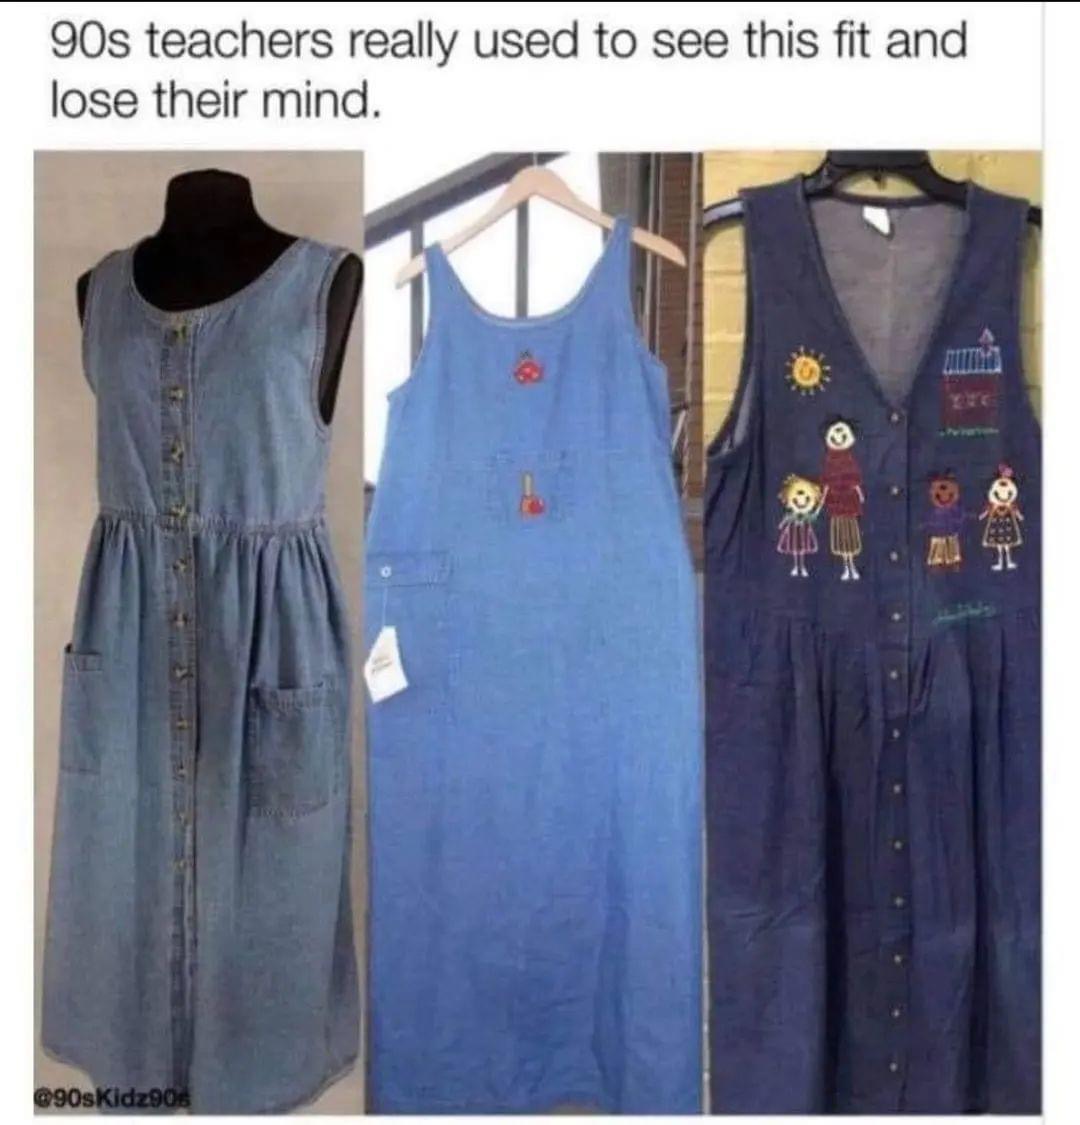 monday morning randomness - 90s teacher outfit - 90s teachers really used to see this fit and lose their mind.